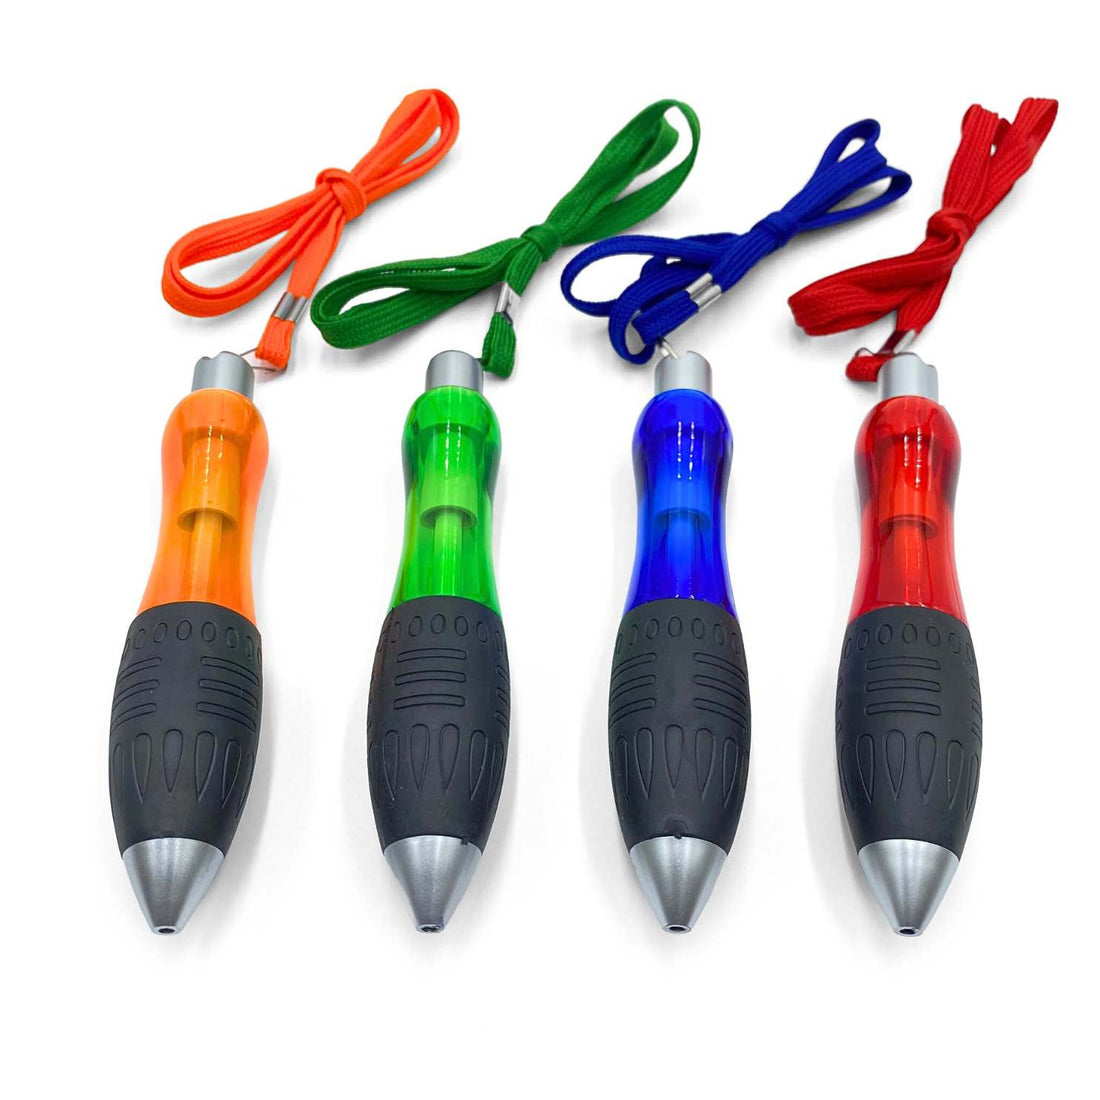 four extra thick pens with lanyards in orange, green, blue, red